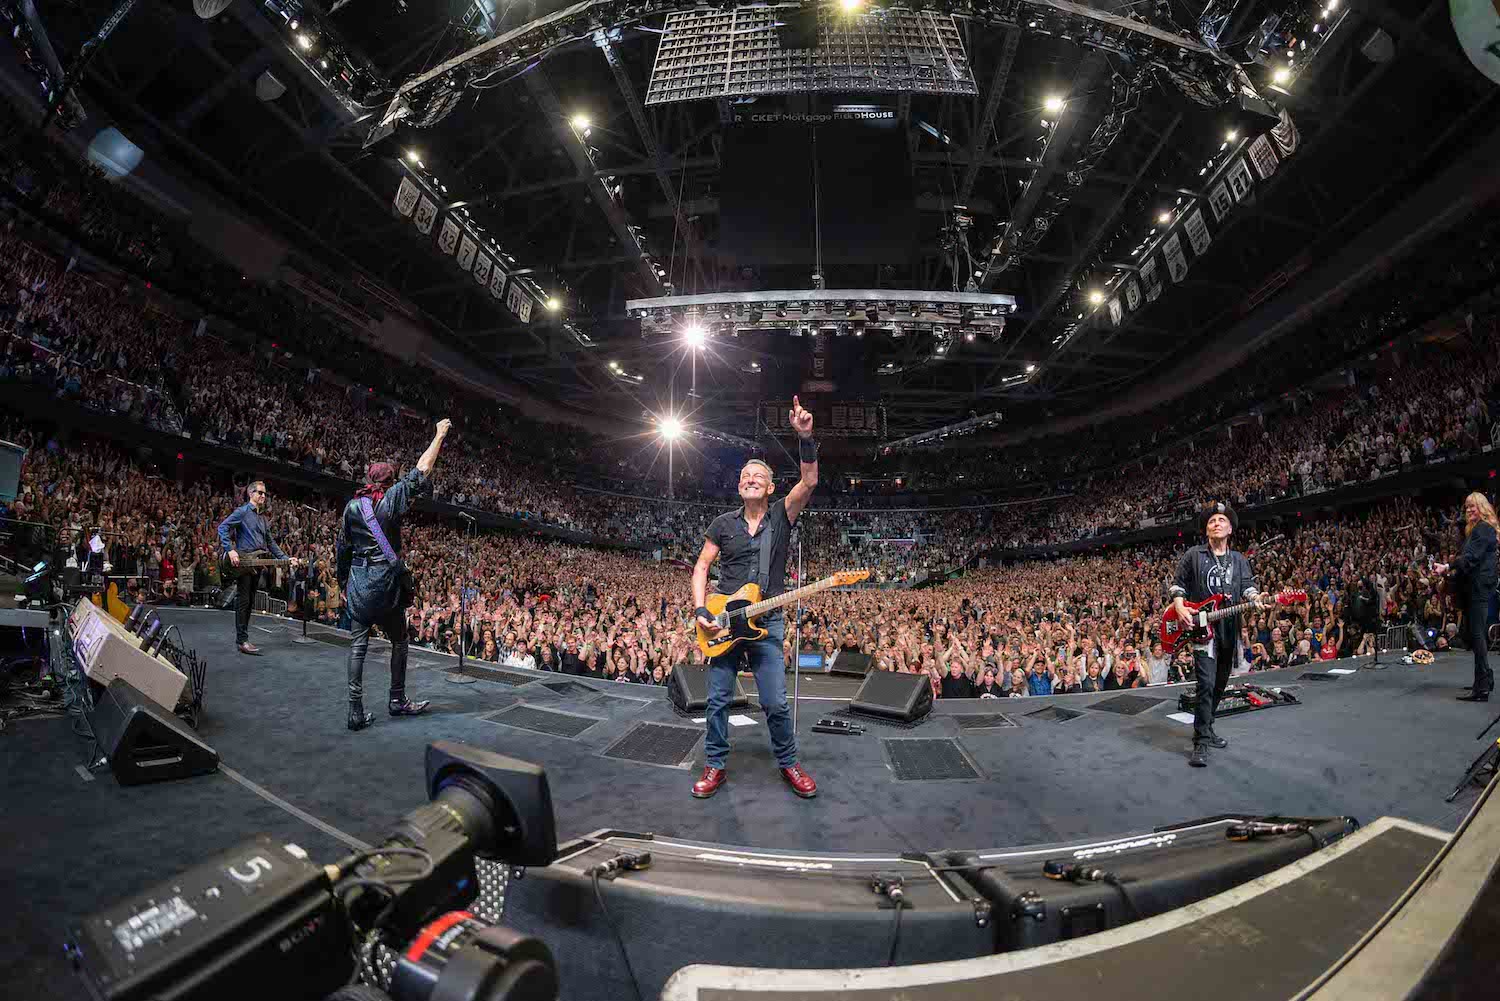 Bruce Springsteen & E Street Band at Rocket Mortgage Fieldhouse, Cleveland, OH on April 5, 2023.